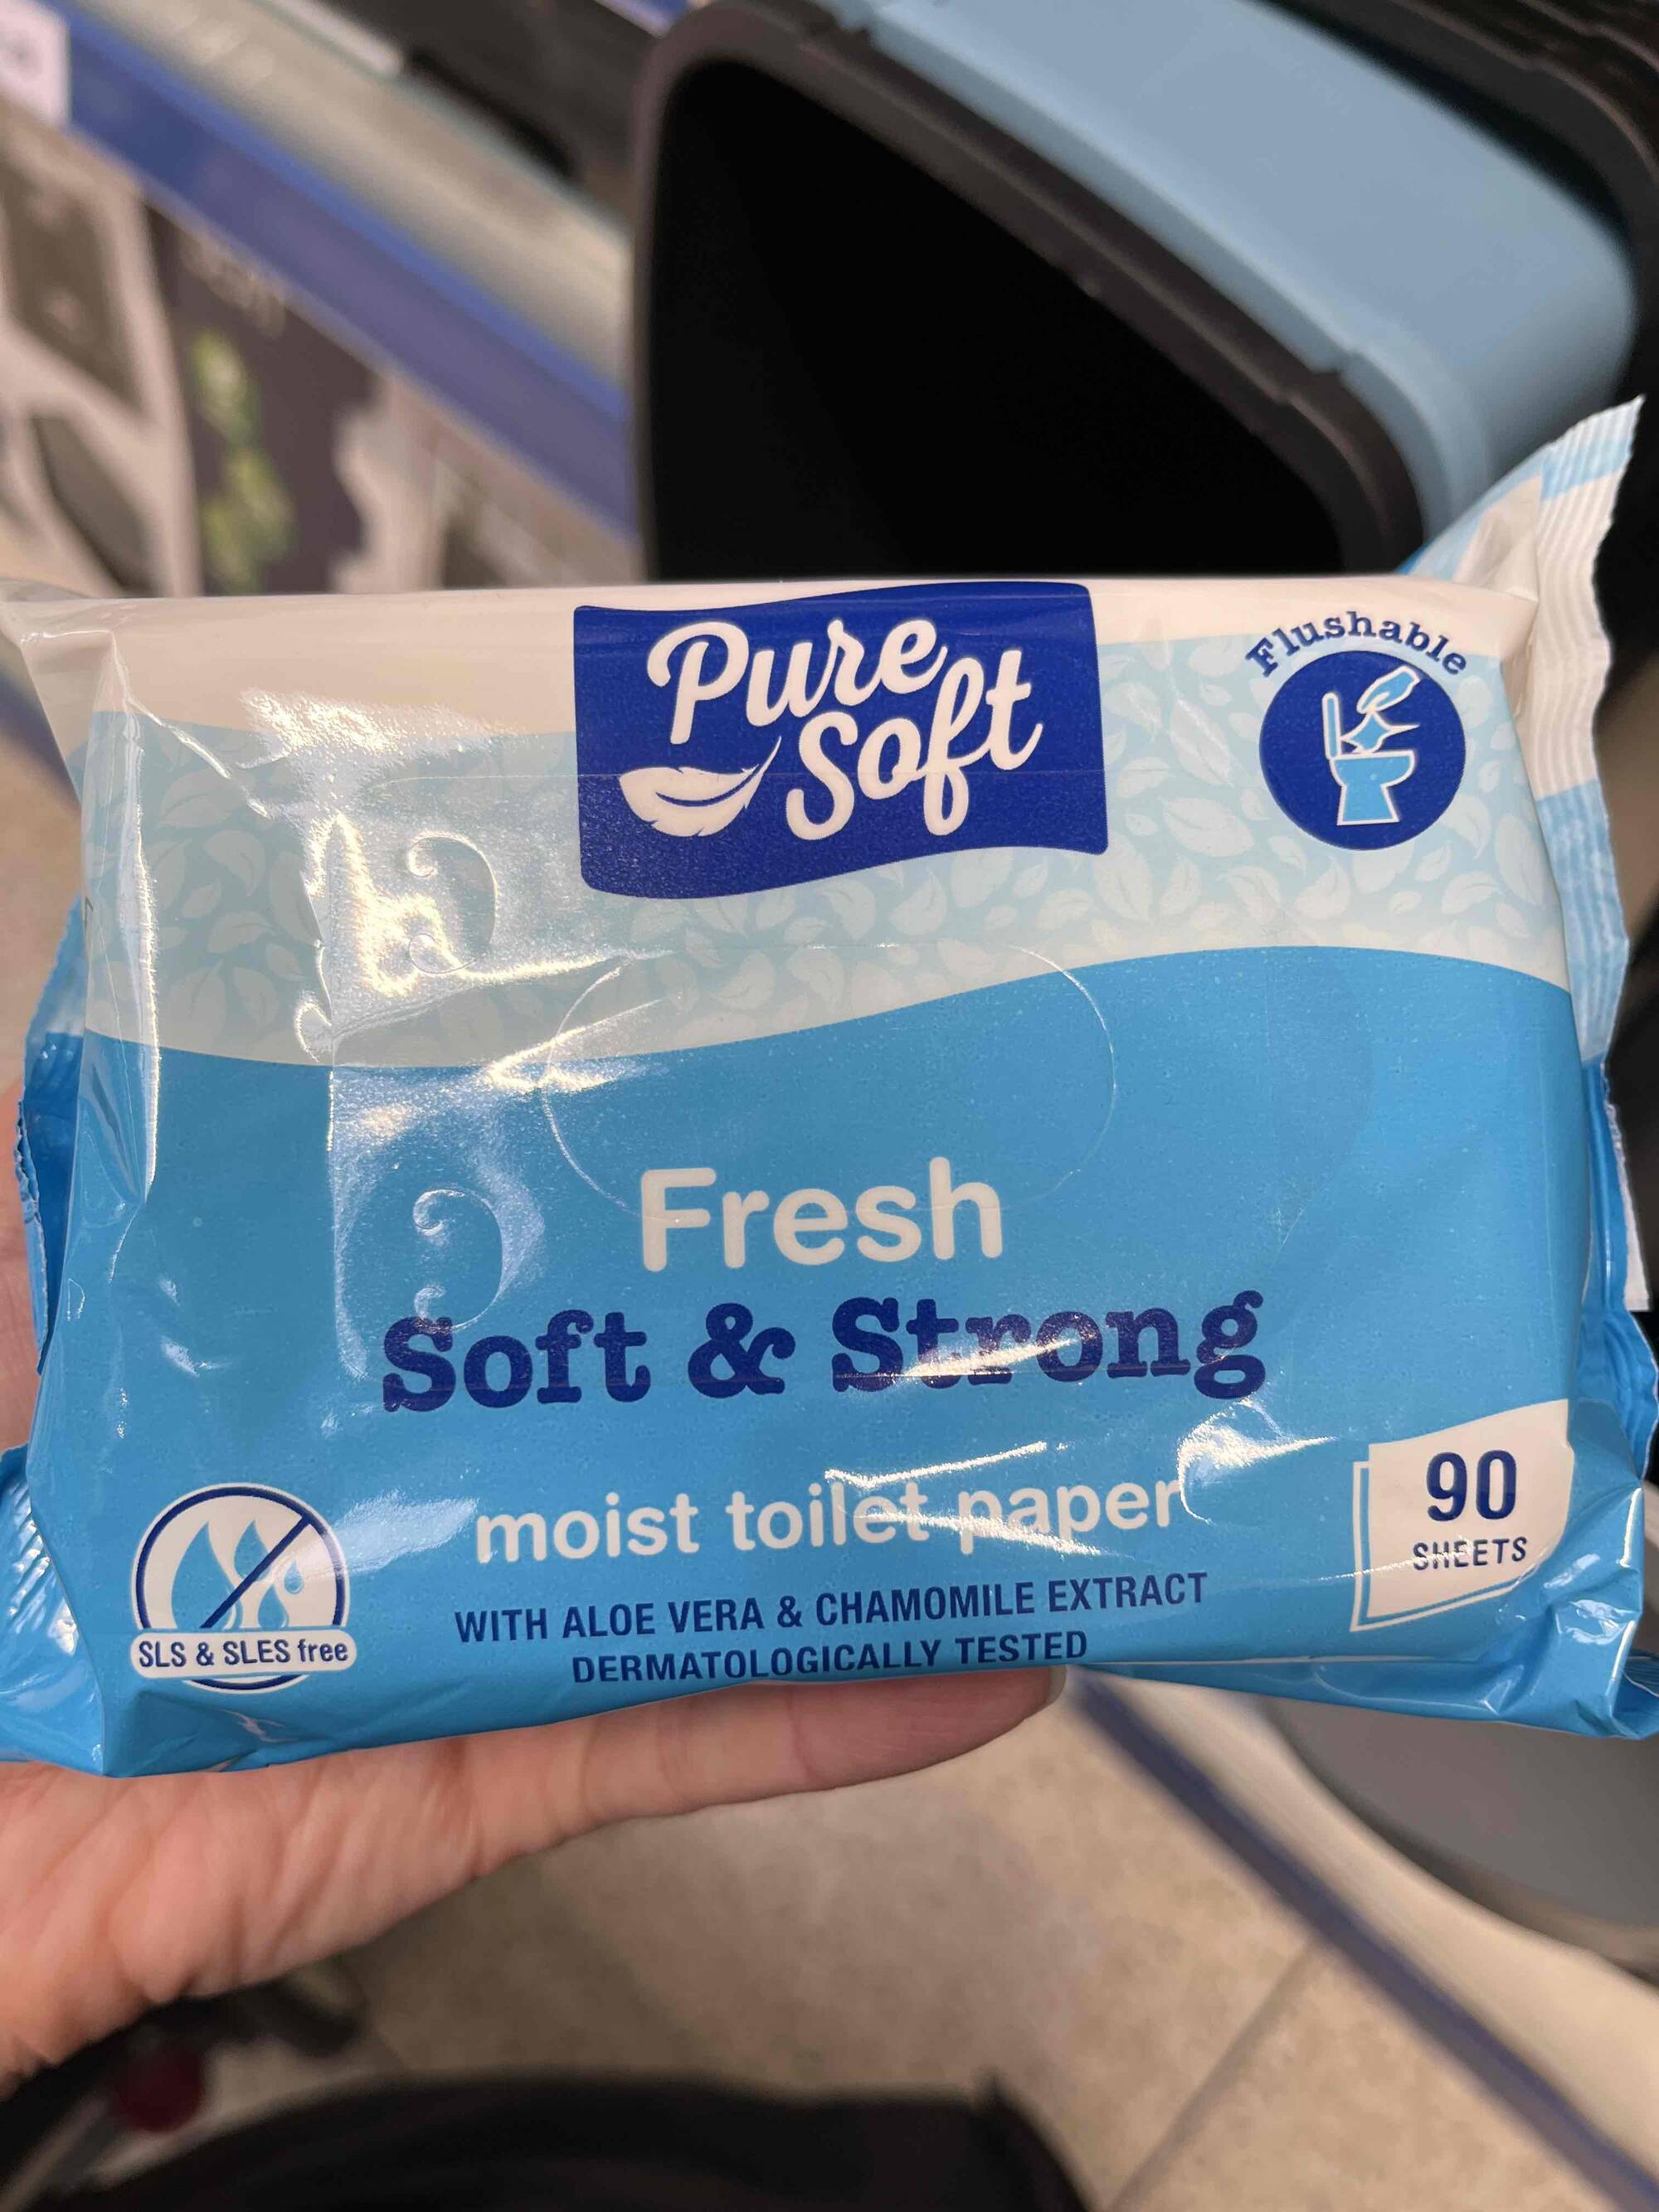 DAYES - Fresh soft & strong - Moist toilet paper